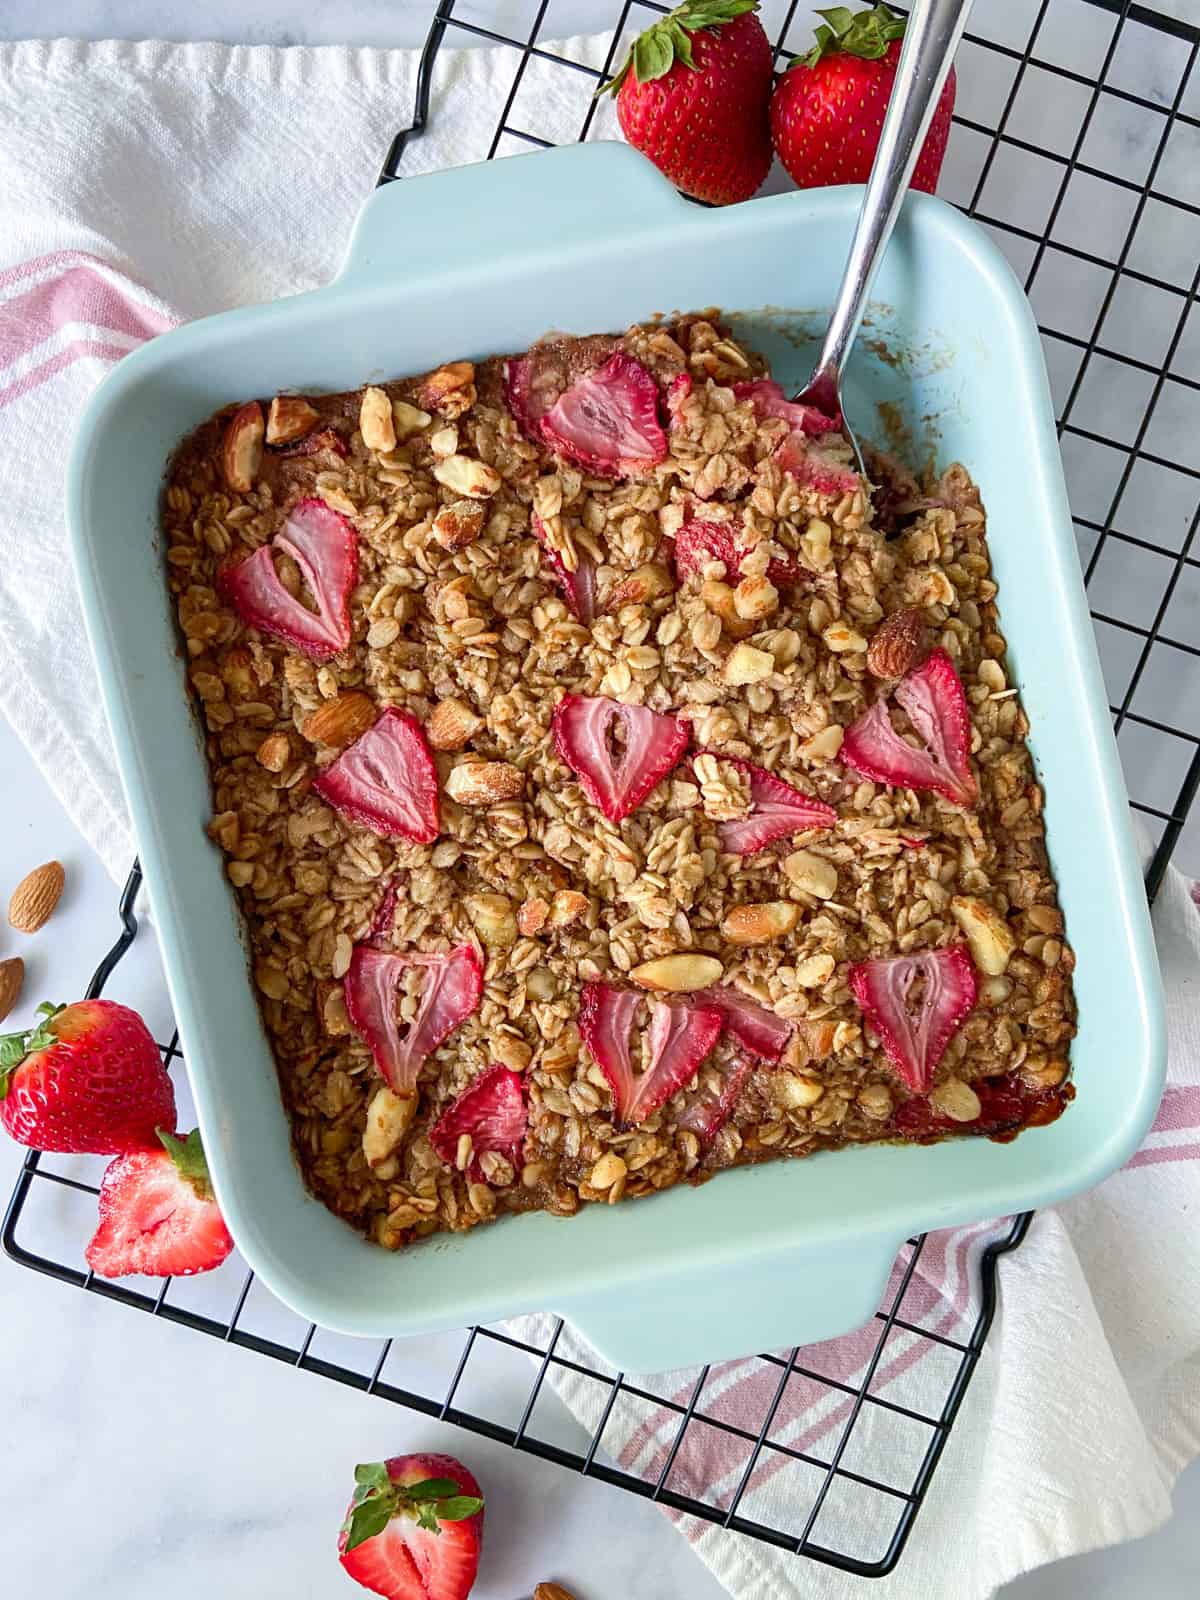 Strawberry baked oatmeal with fresh strawberries.